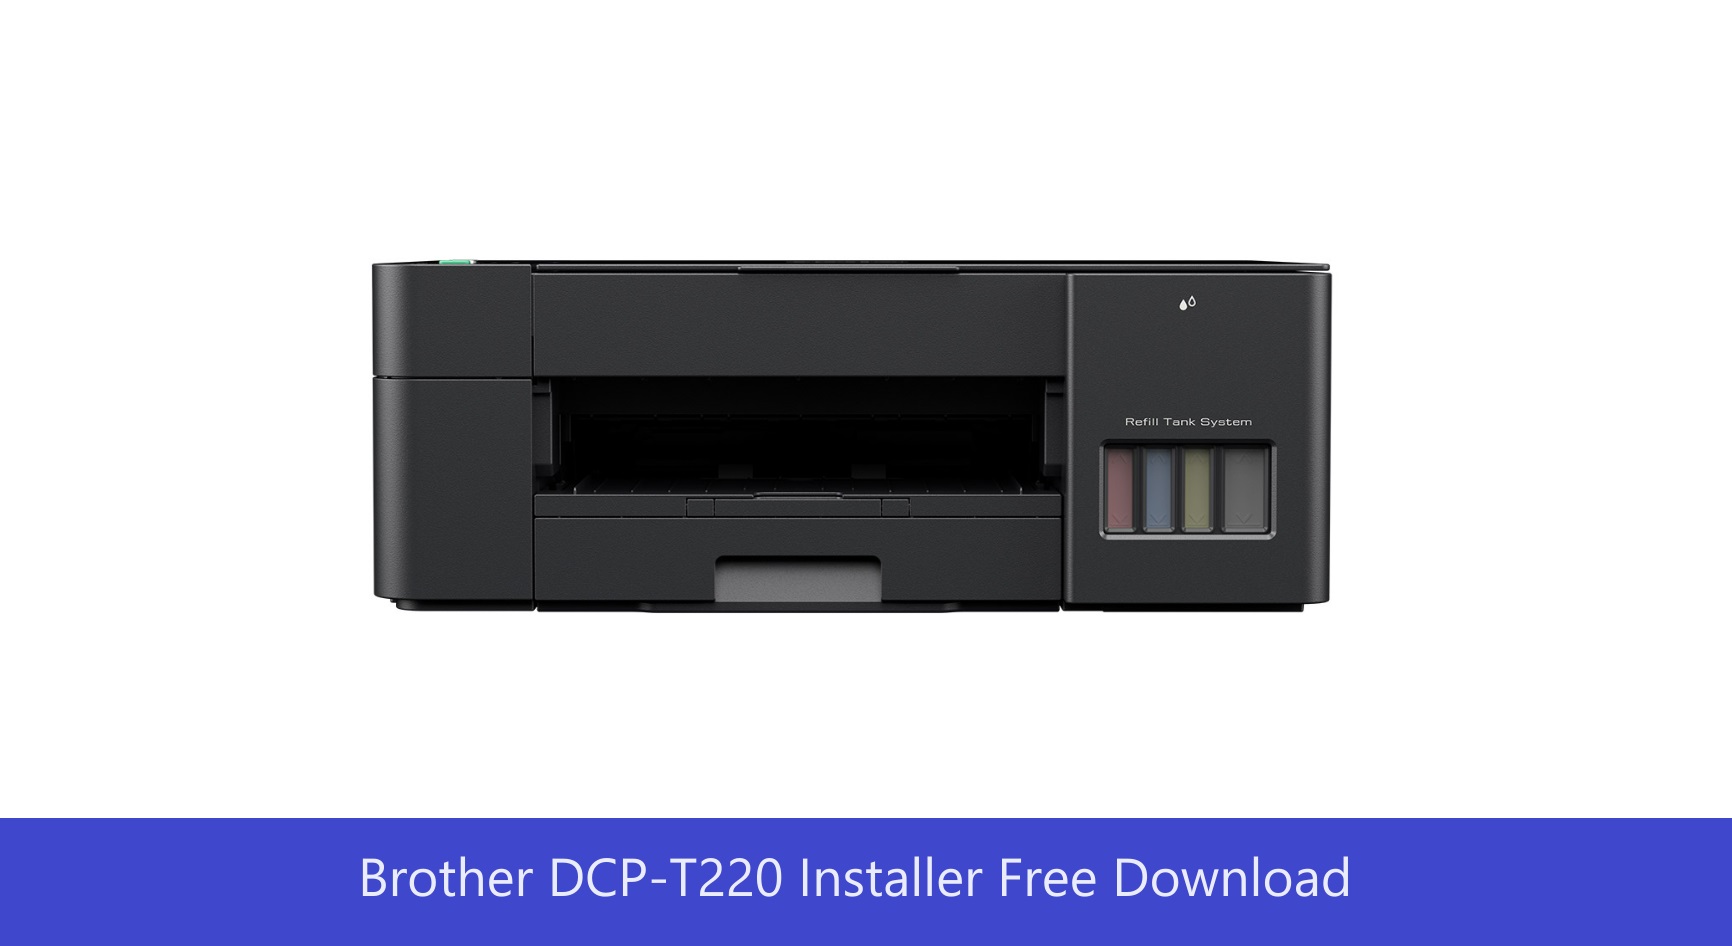 Brother DCP-T220 Installer